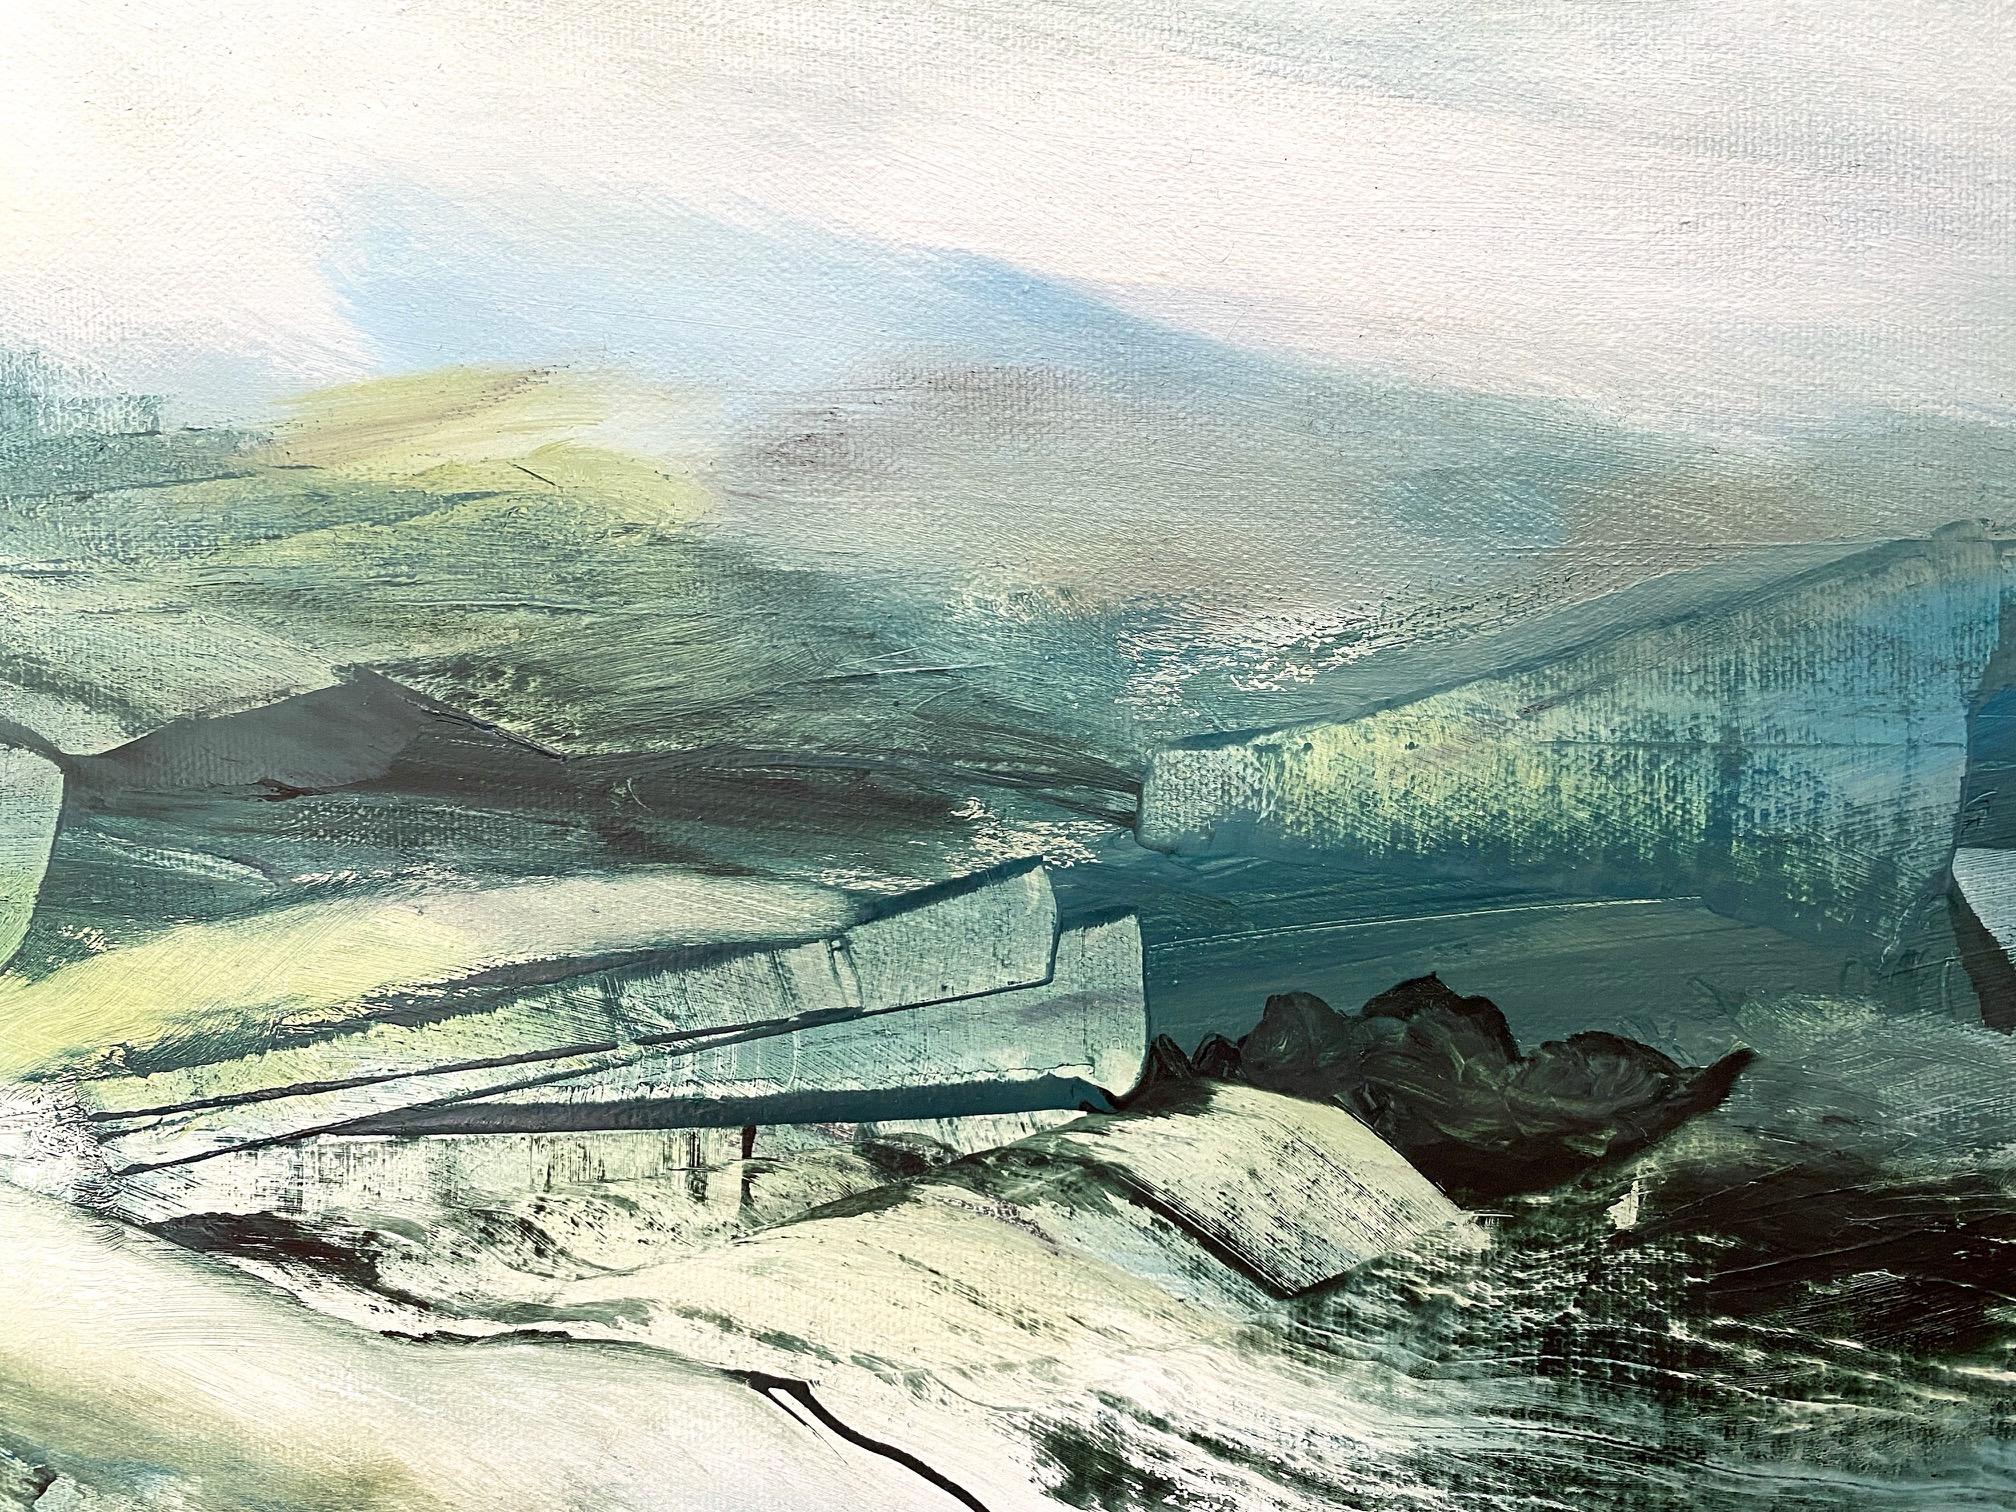 This painting is taken from the feeling and atmosphere of being on the Waternish Peninsular in Skye on a very wild and wet day, the mist was down and things were half seen and the landscape took on an ephemeral quality. The quality of light was low